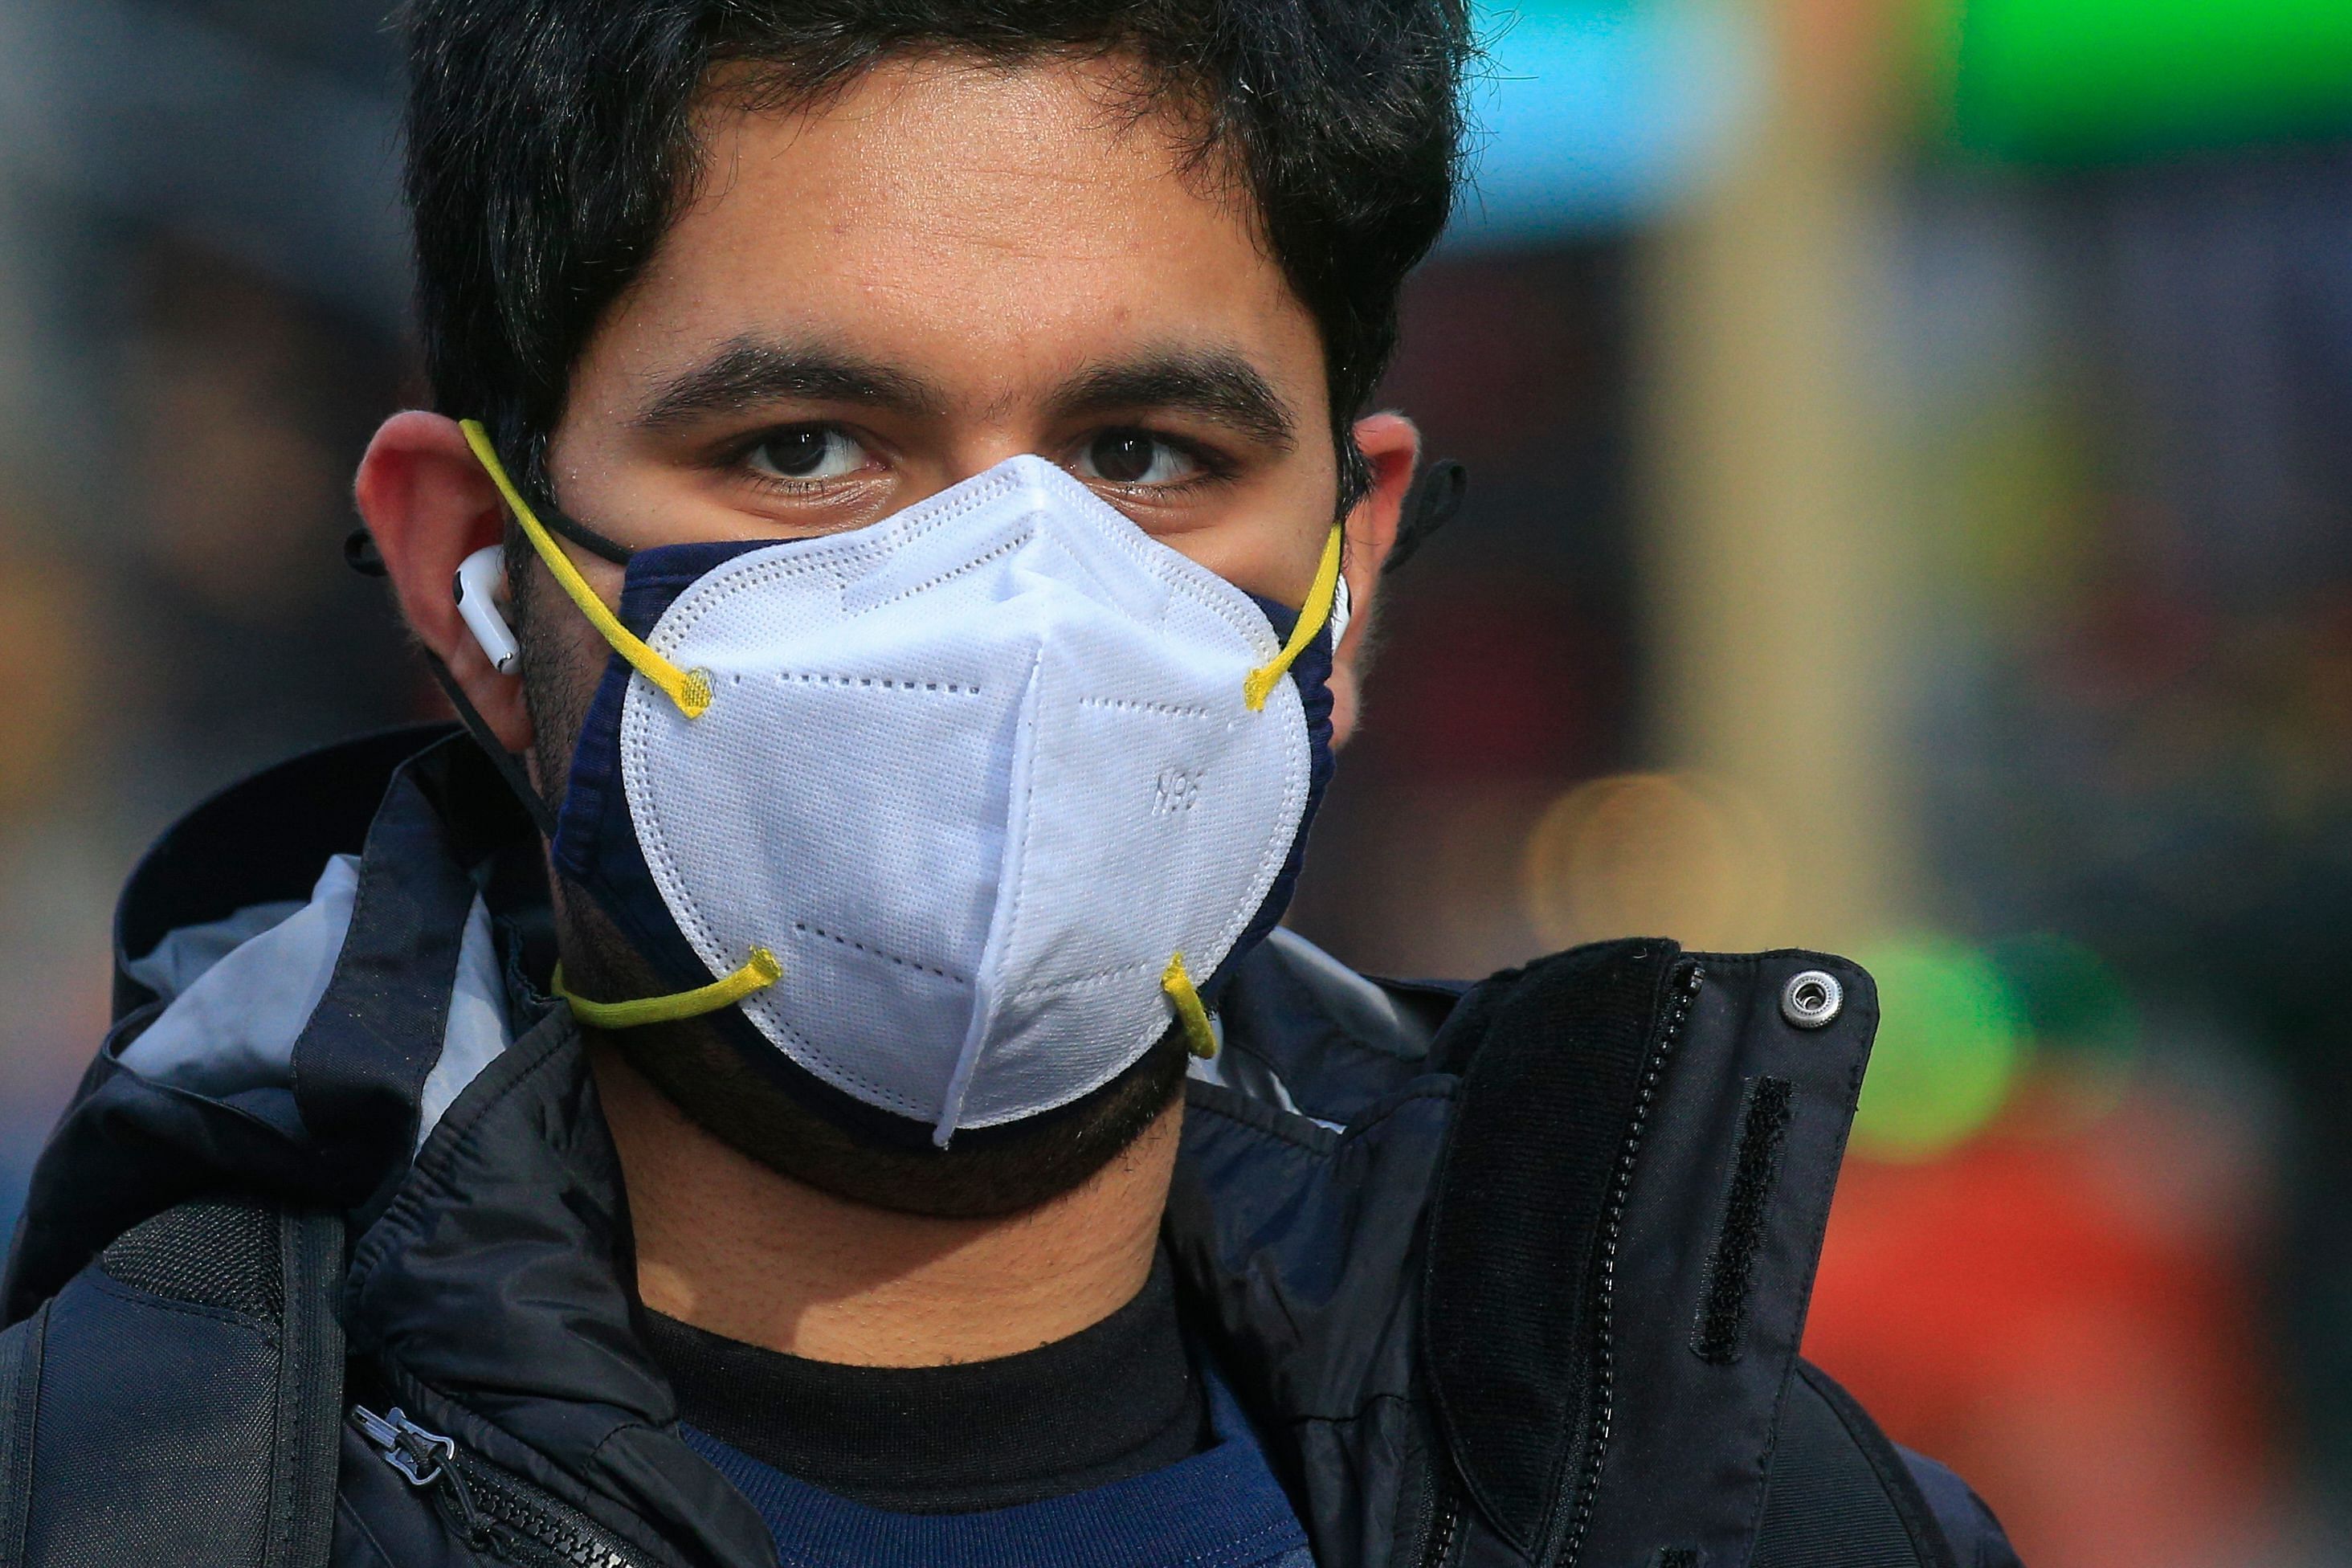 Wearing two masks or a close-fitting one offers significantly better protection against catching and spreading Covid-19, according to a new US study released on February 10, 2021. The impact of mask-wearing has been a hotly-debated topic worldwide during the pandemic, with the United States -- where 468,000 people have died -- now urging everyone over the age of two to wear masks in public. Credit: Illustrative Image/Credit: AFP Photo